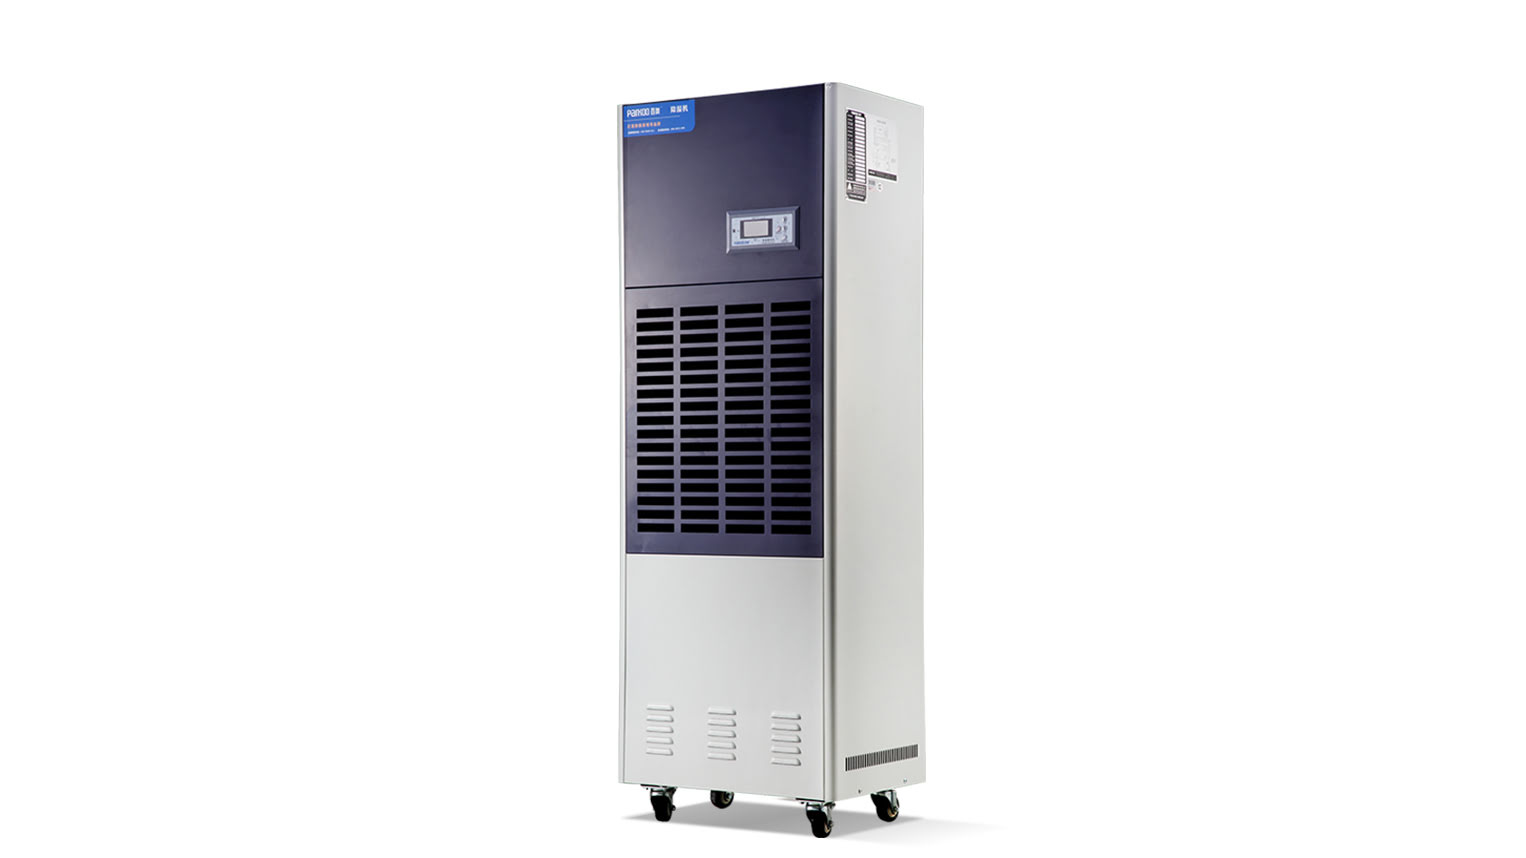 The moisture-proof skill of returning to Nantian not only includes Dehumidifier